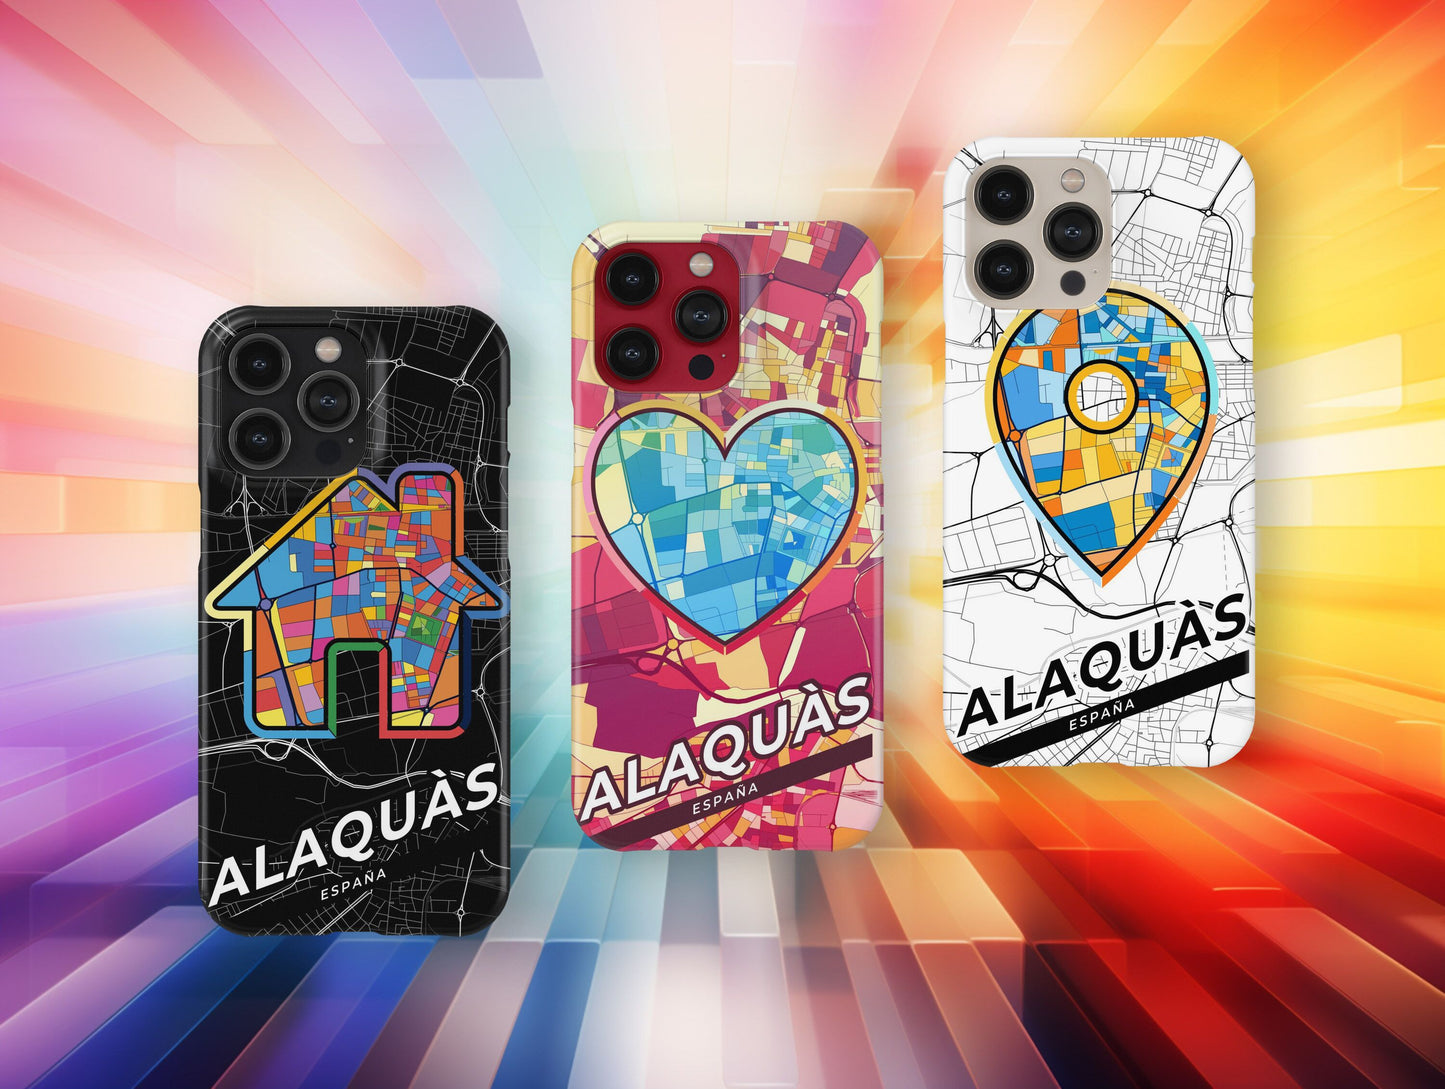 Alaquàs Spain slim phone case with colorful icon. Birthday, wedding or housewarming gift. Couple match cases.